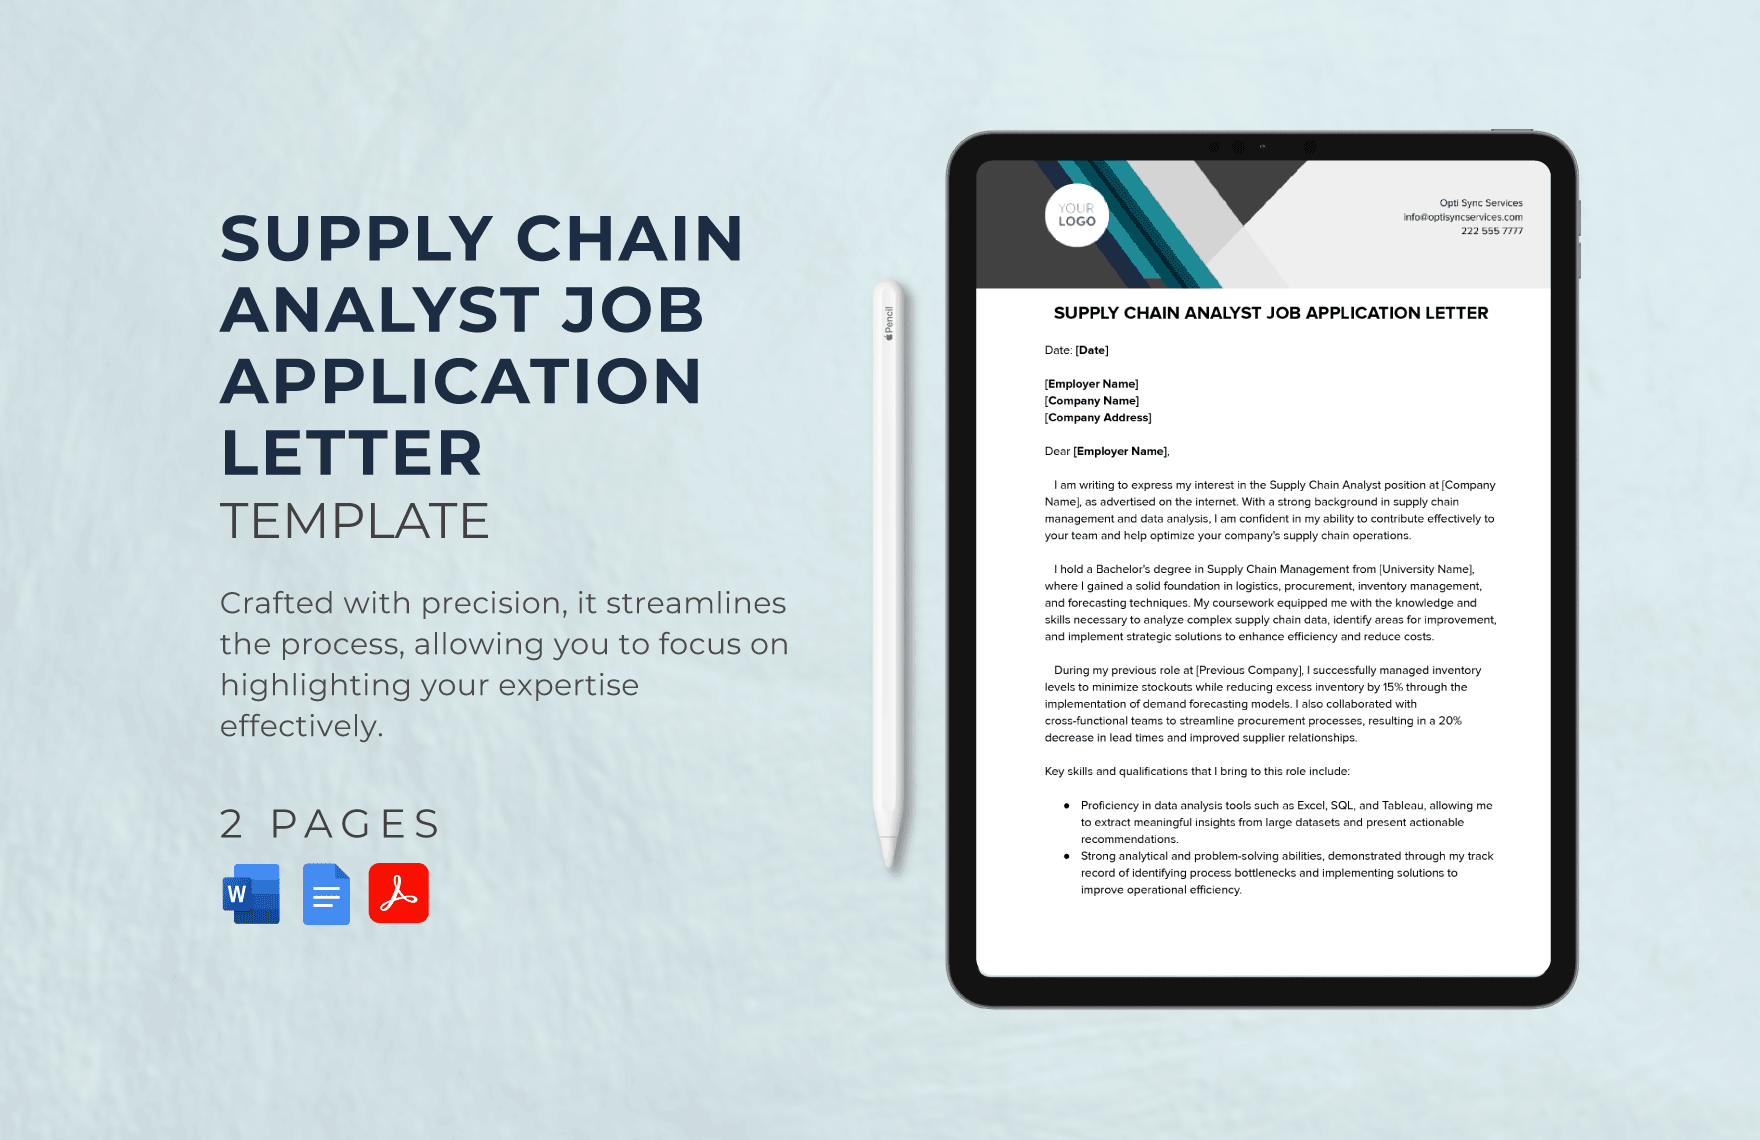 Supply Chain Analyst Job Application Letter Template in Word, Google Docs, PDF